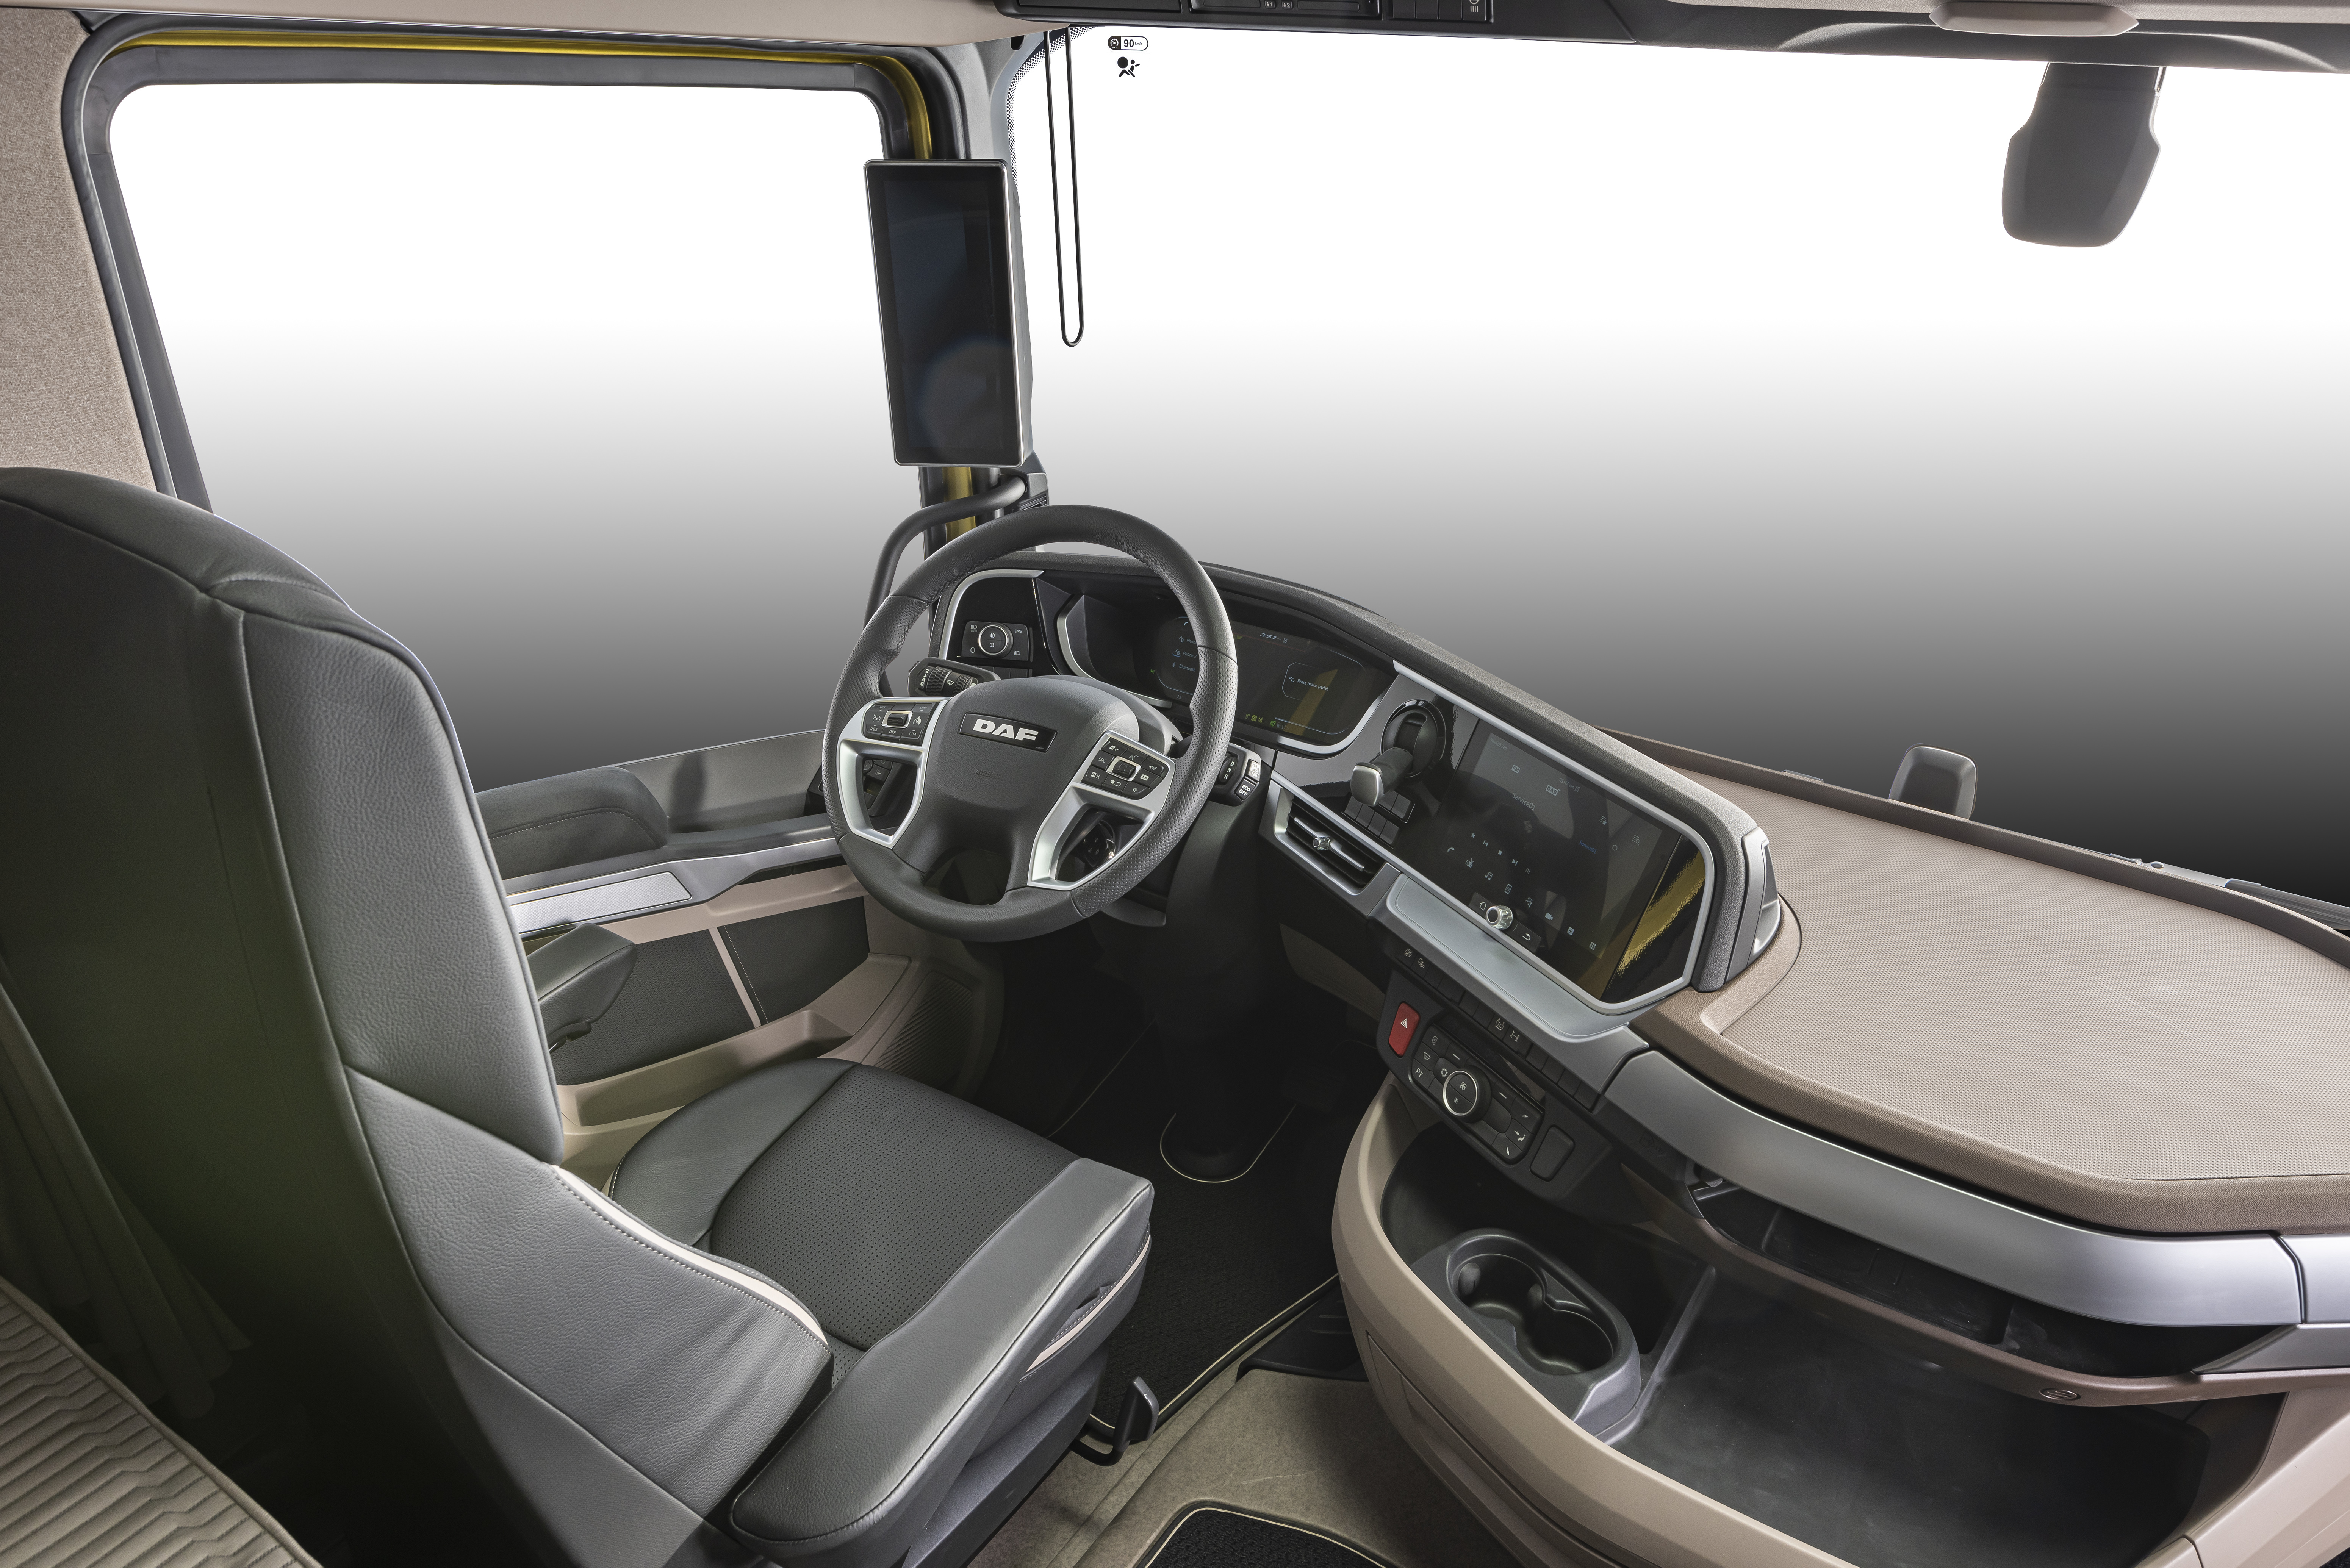 Interieur NGD